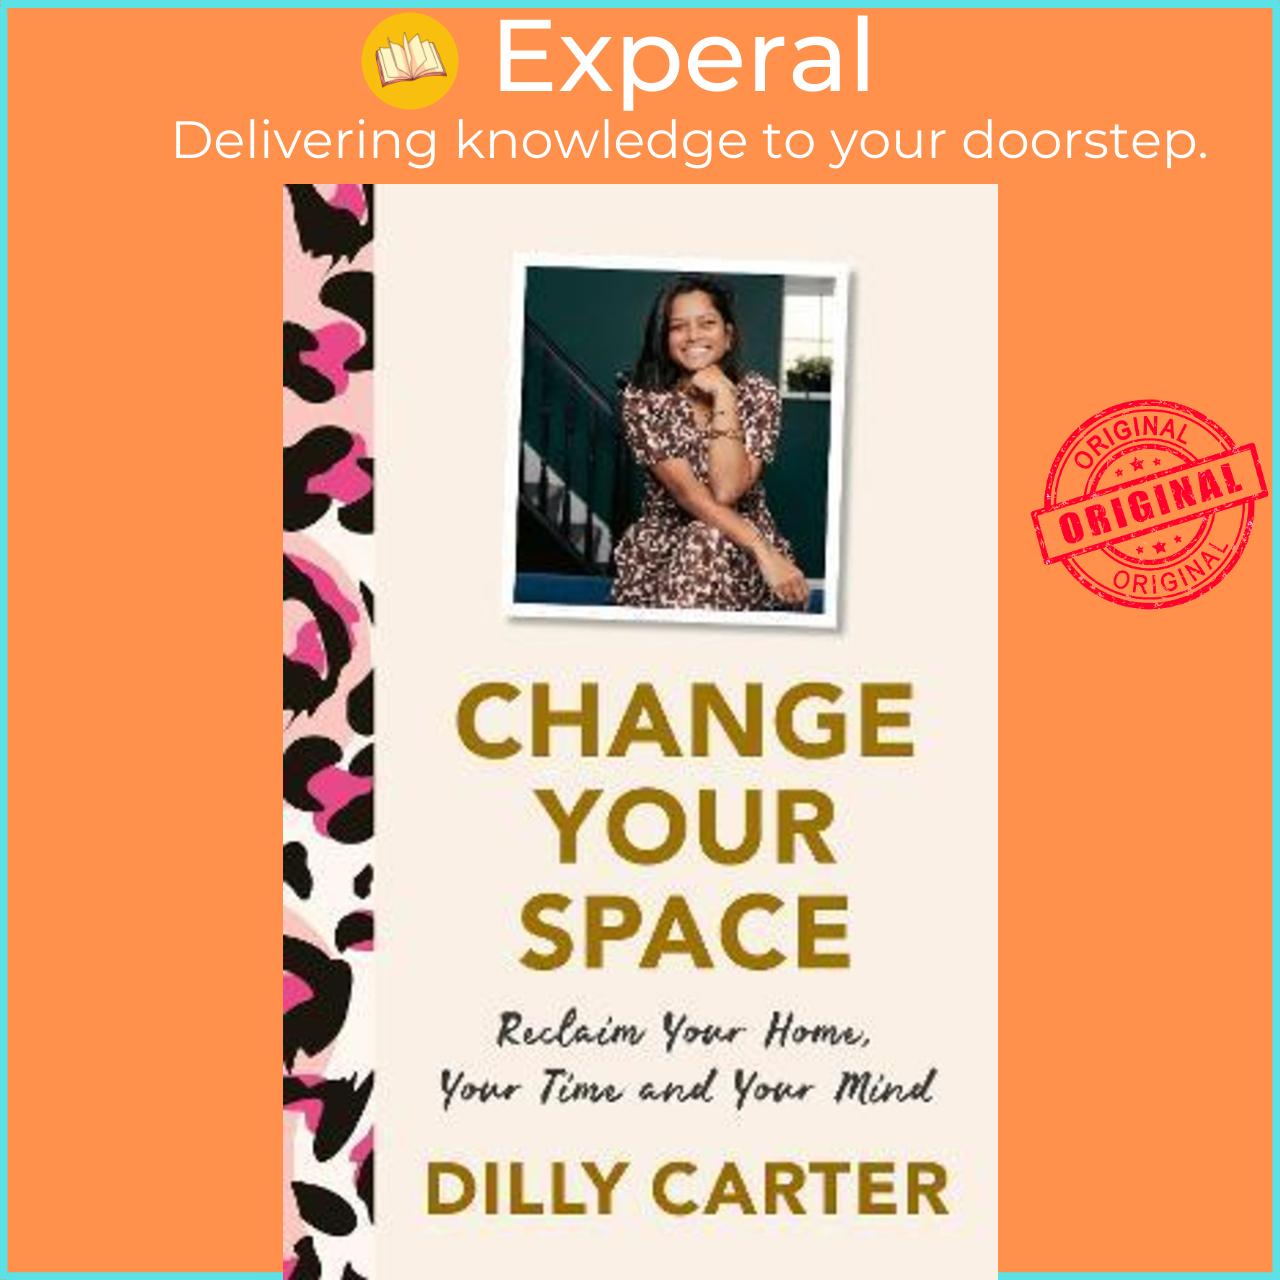 Sách - Change Your Space : Reclaim Your Home, Your Time and Your Mind by Dilly Carter (UK edition, hardcover)